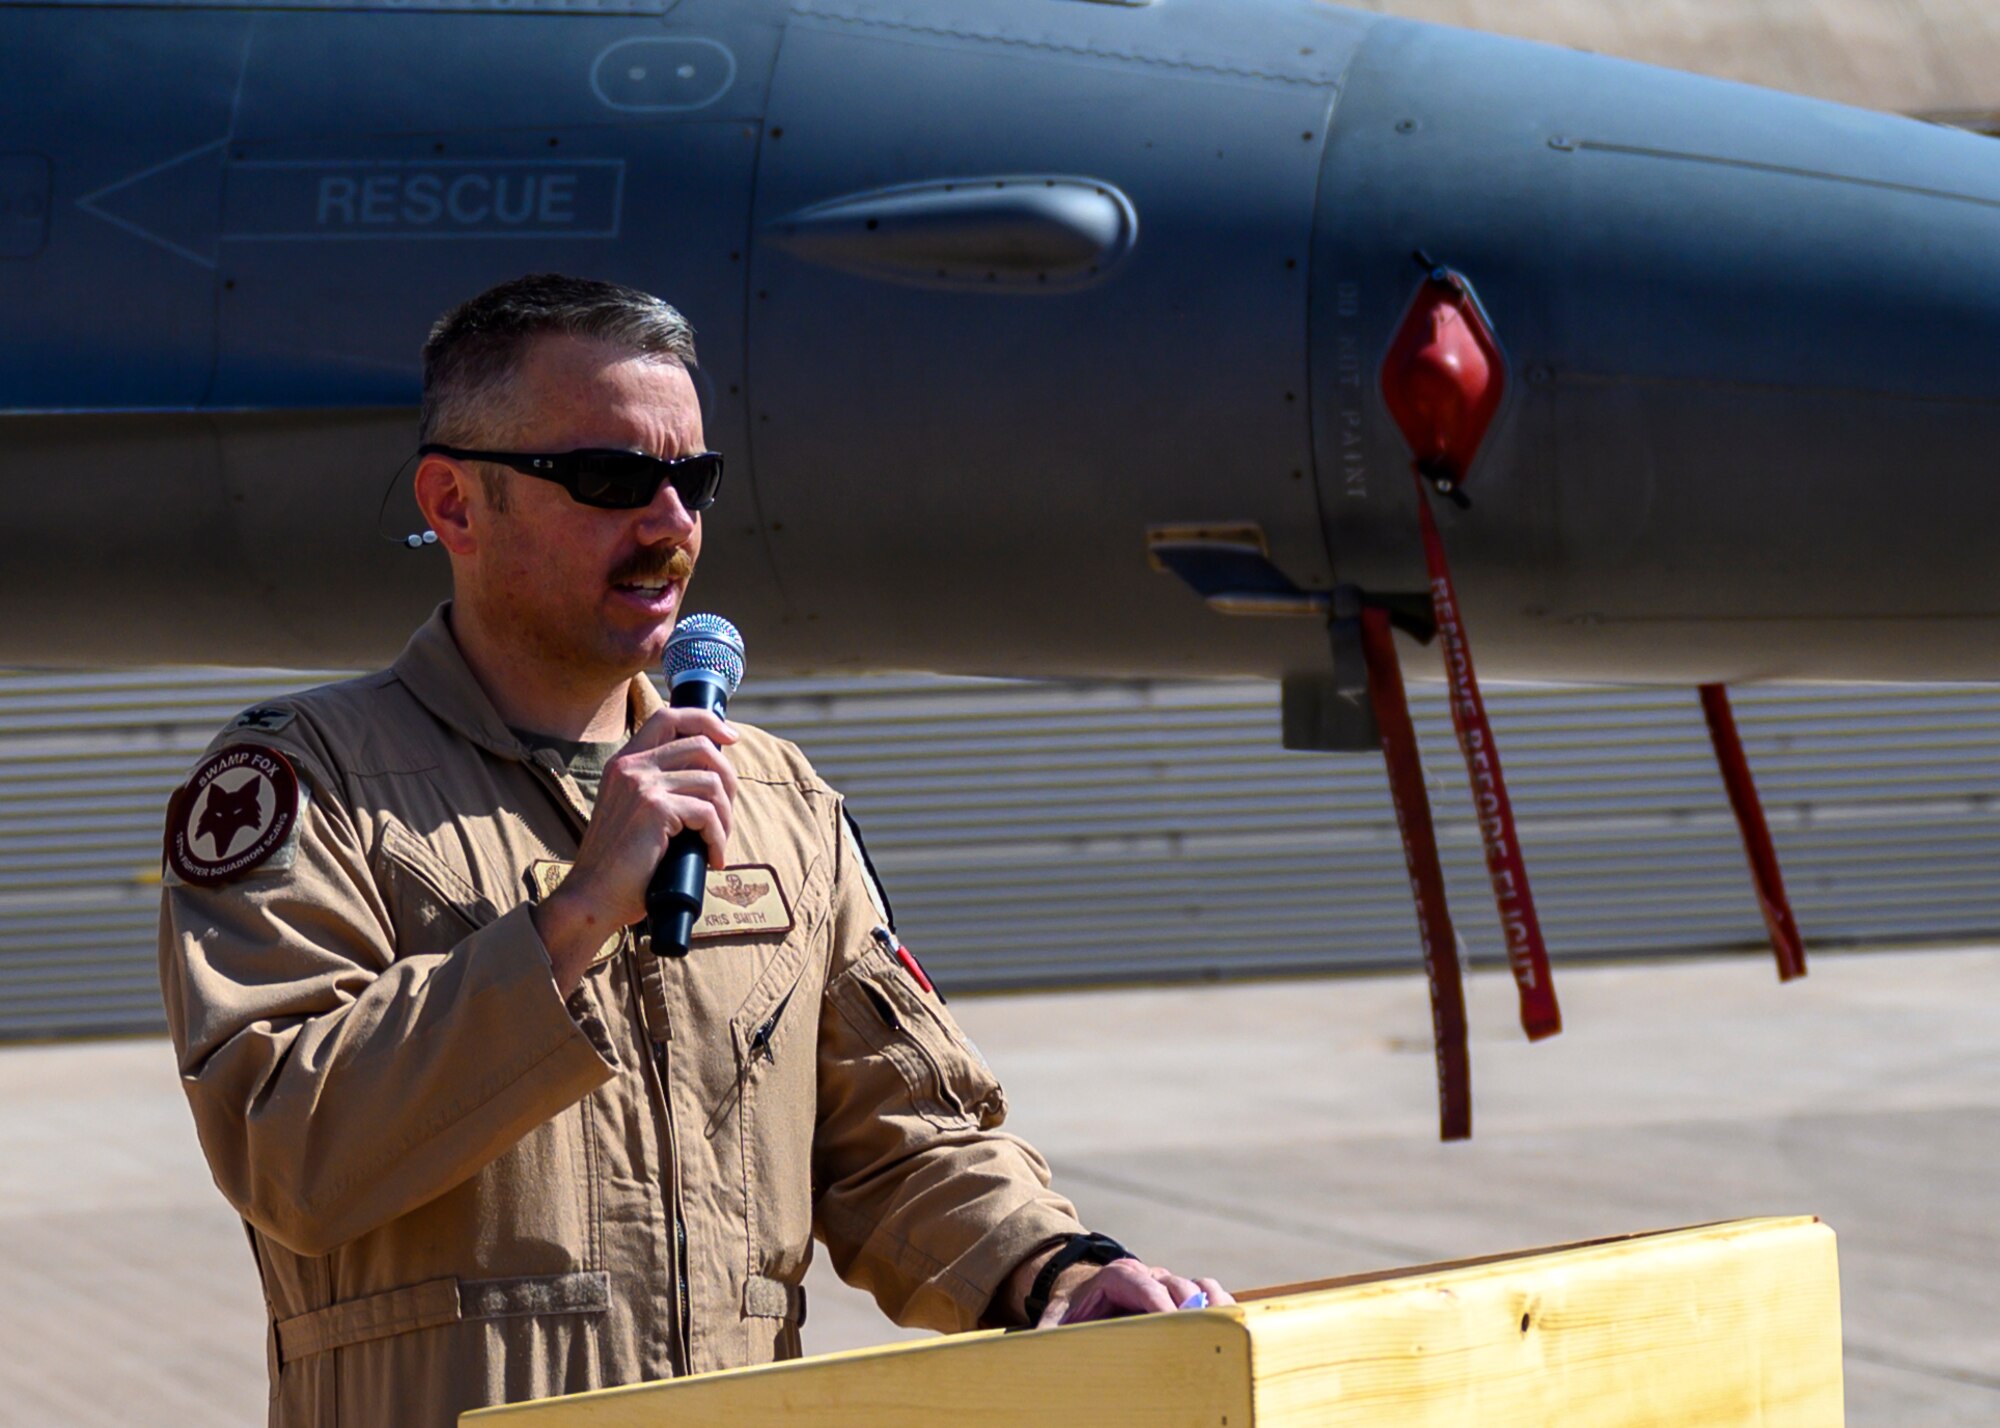 U.S. Air Force Col. Kristoffer “Smirk” Smith, outgoing 378th Expeditionary Operations Group commander, addresses the audience during the group change of command, Prince Sultan Air Base, July 5, 2021. The 378th EOG provides combat power projection in support of U.S. Central Command plans and operations. (U.S. Air Force photo by Senior Airman Samuel Earick)